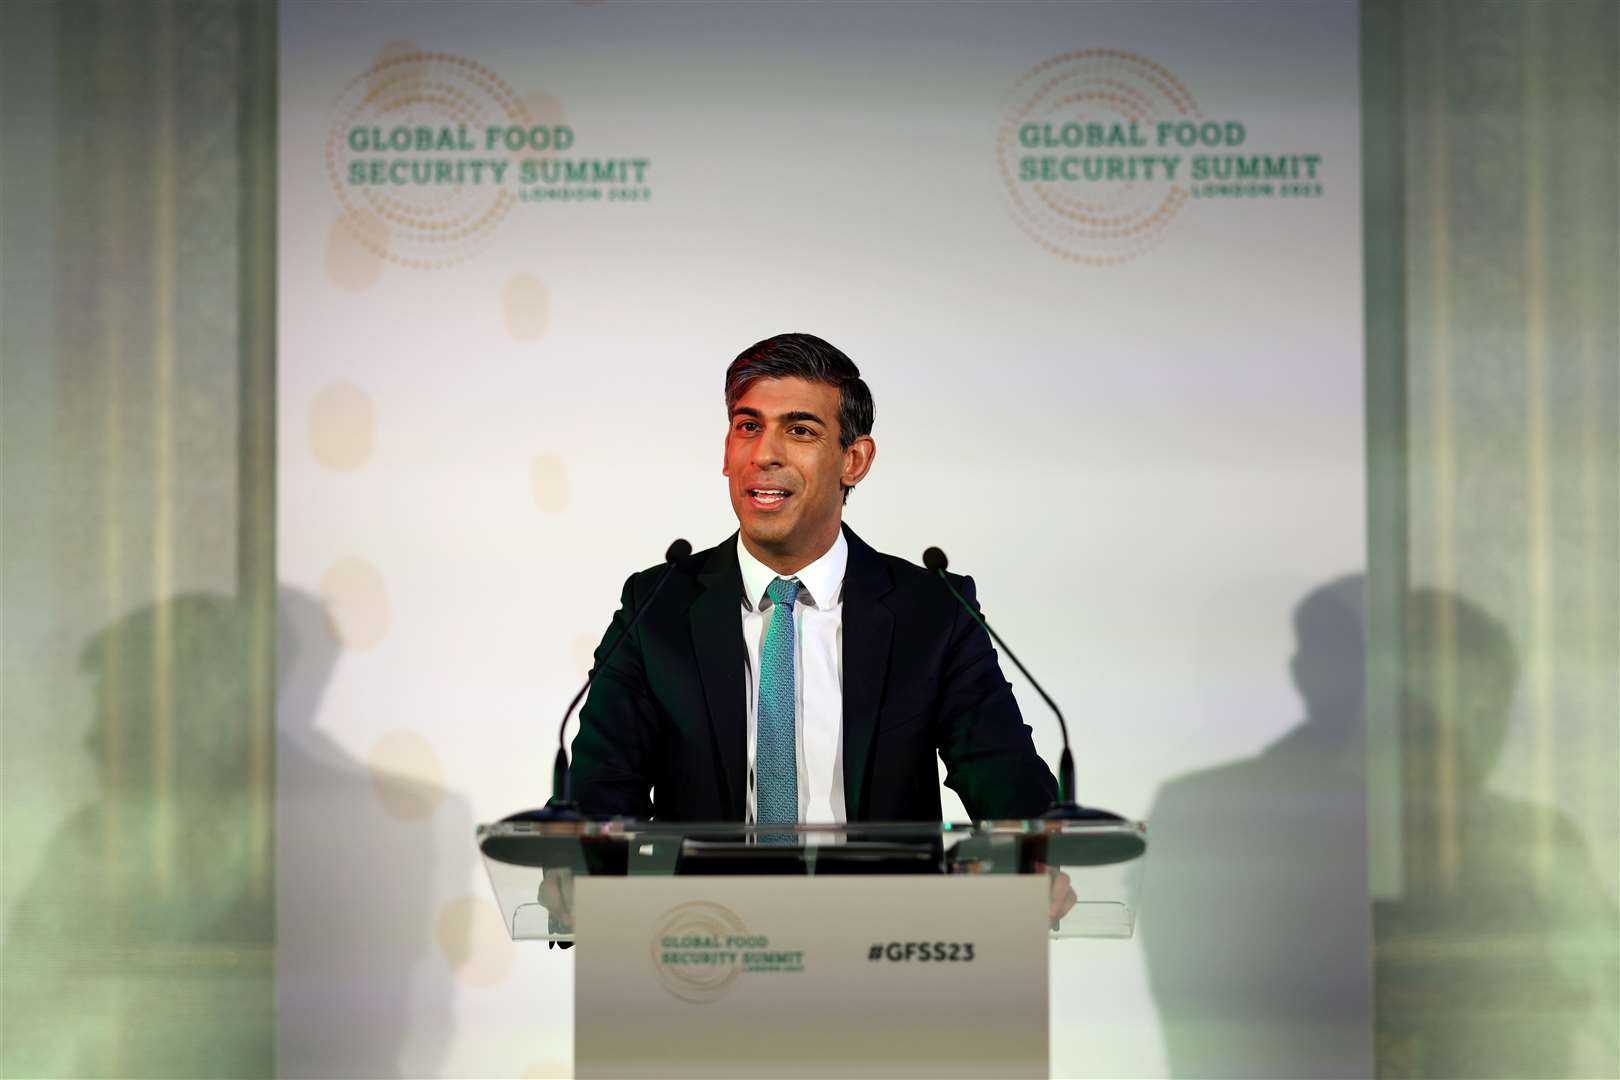 The Prime Minister opened the Global Food Security Summit in London last week, aiming in part to mitigate the climate effects on food production (Dan Kitwood/PA)